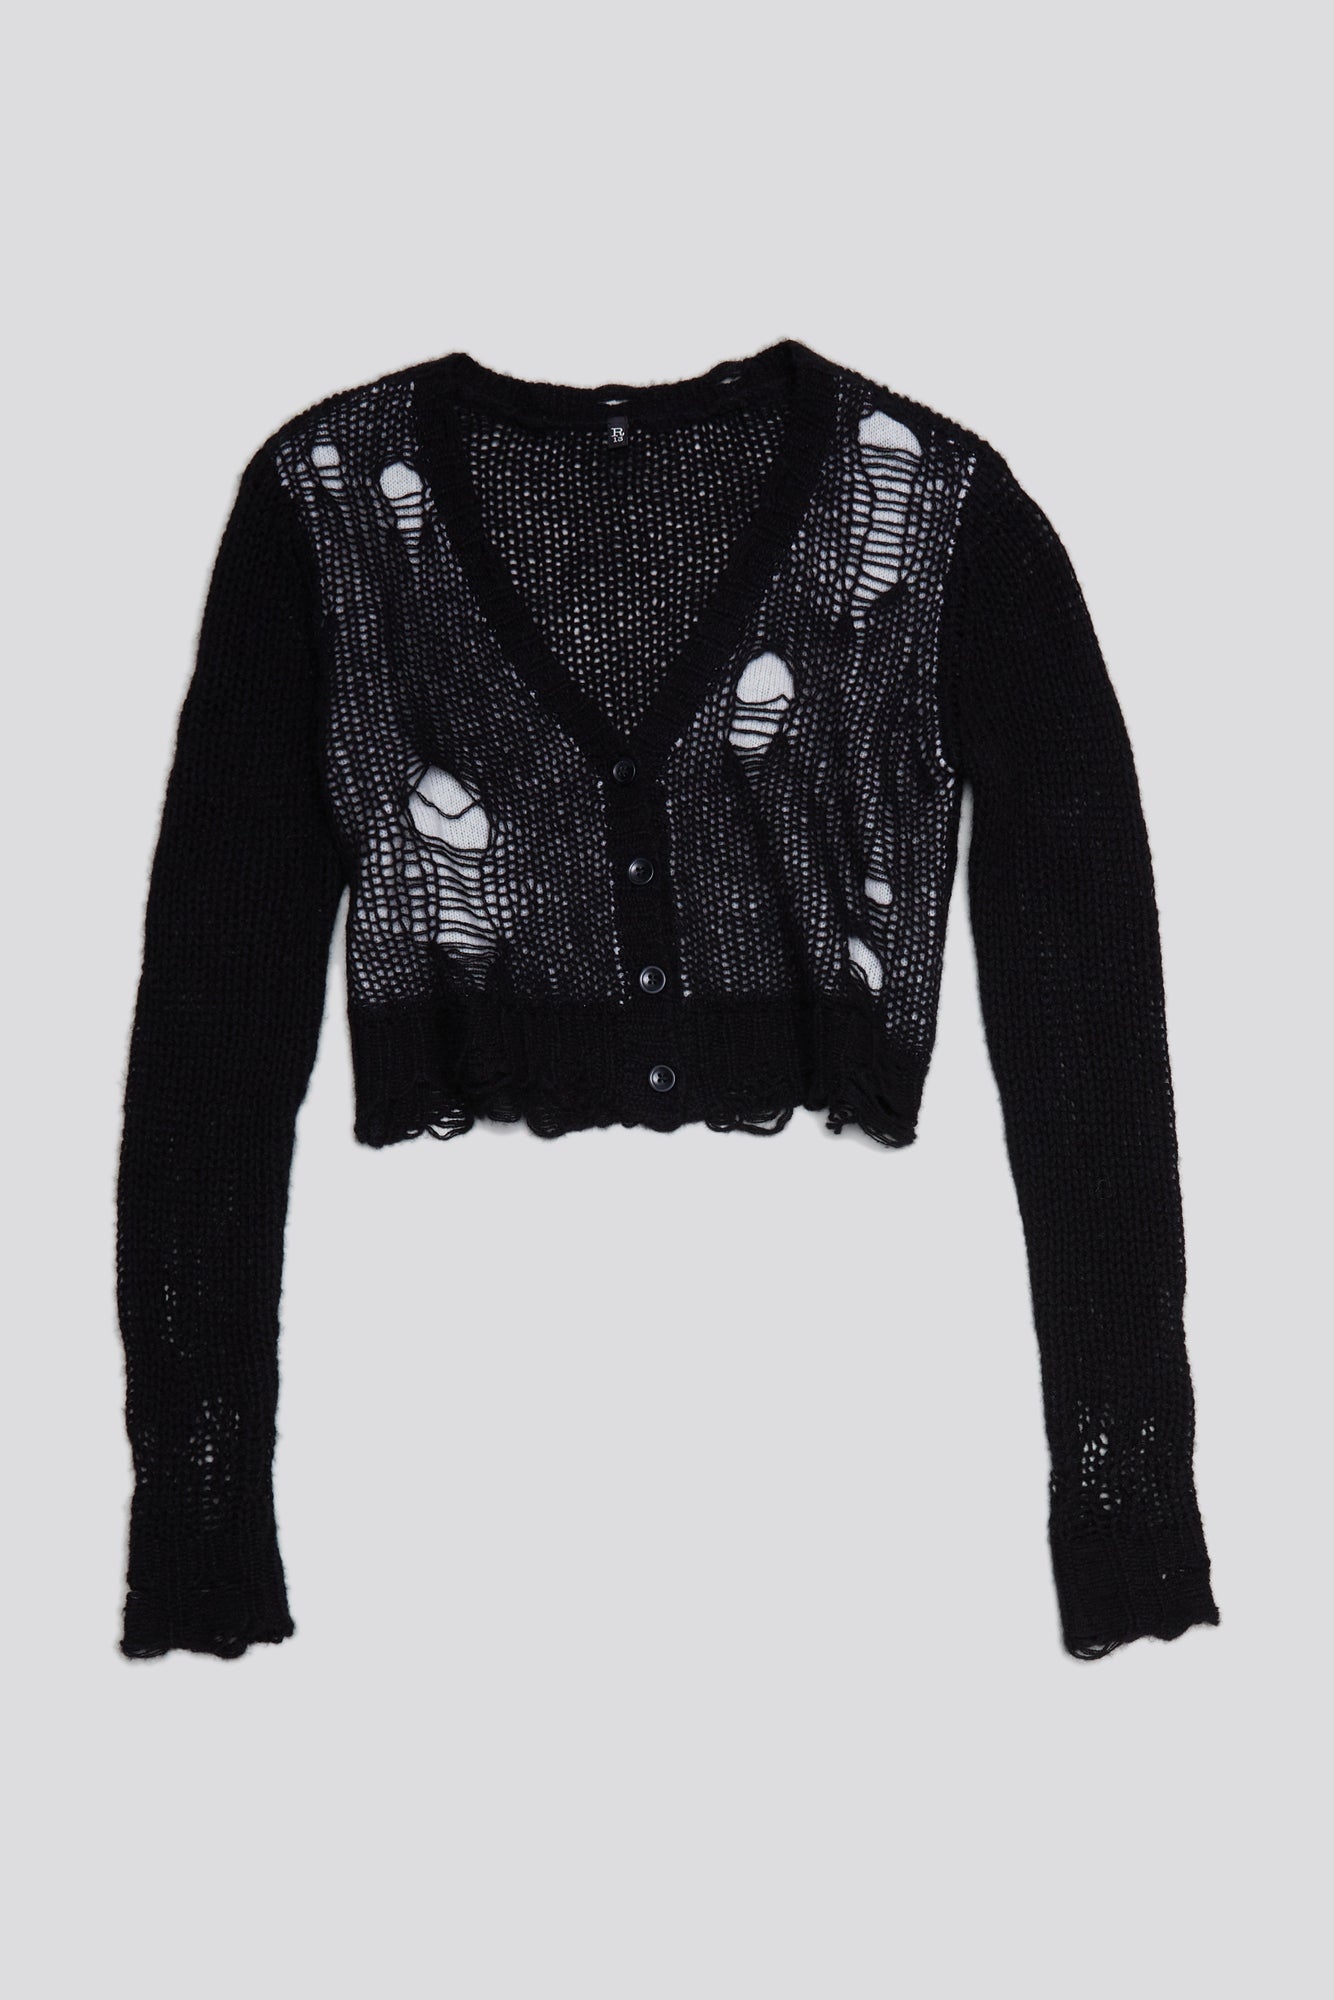 DOUBLE LAYER BABY CARDIGAN - BLACK AND ECRU - 1